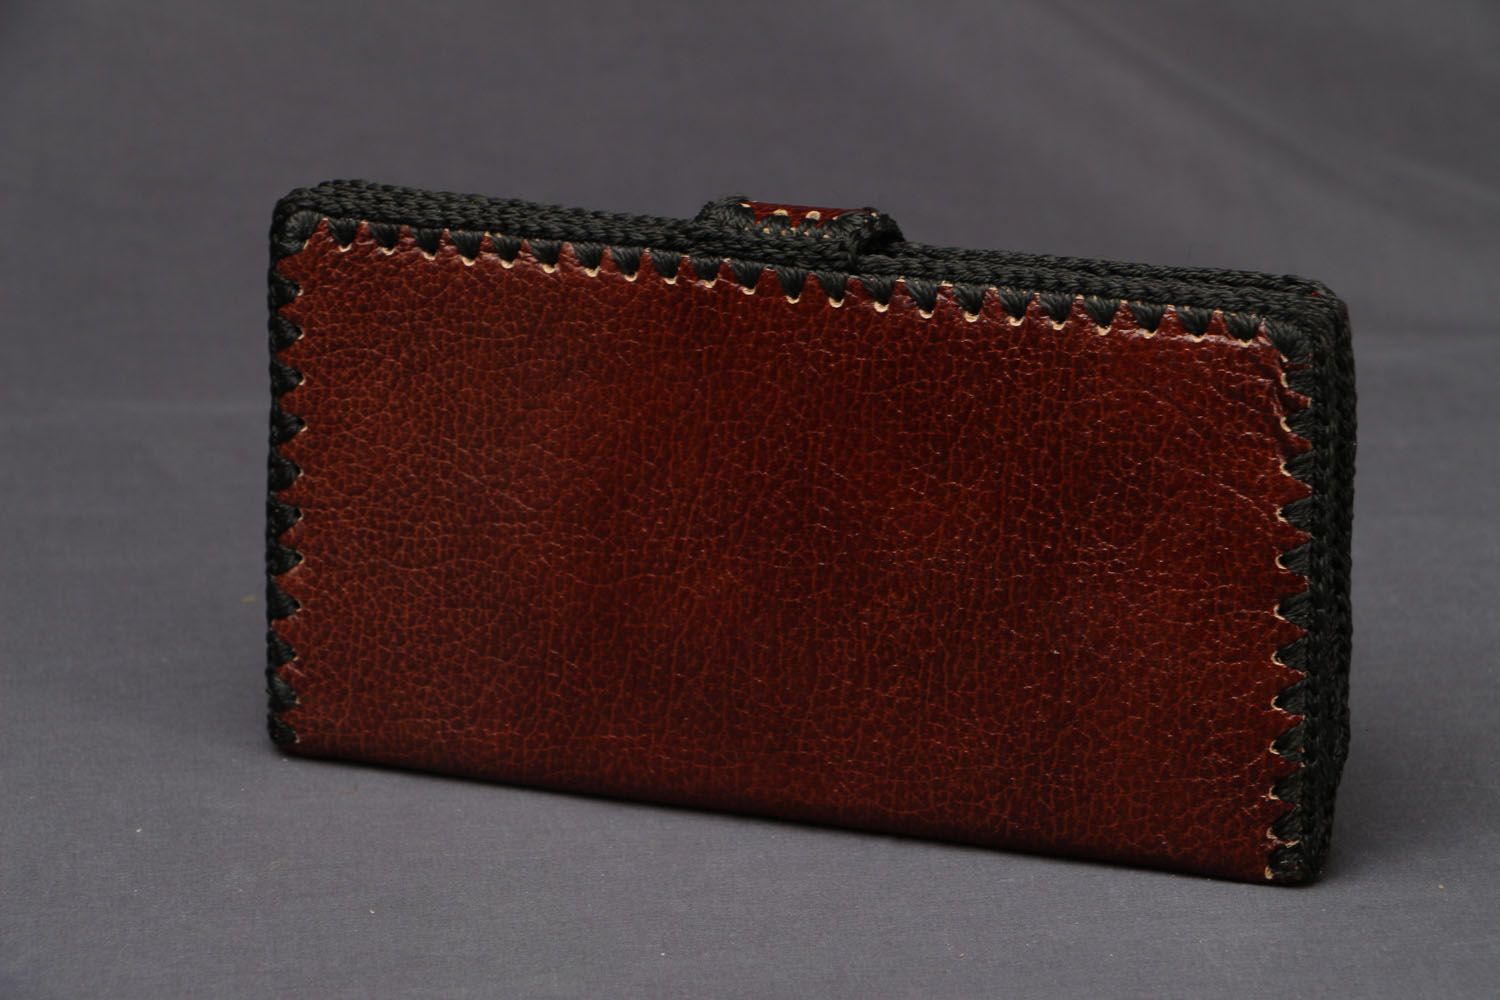 Cherry leather wallet photo 2